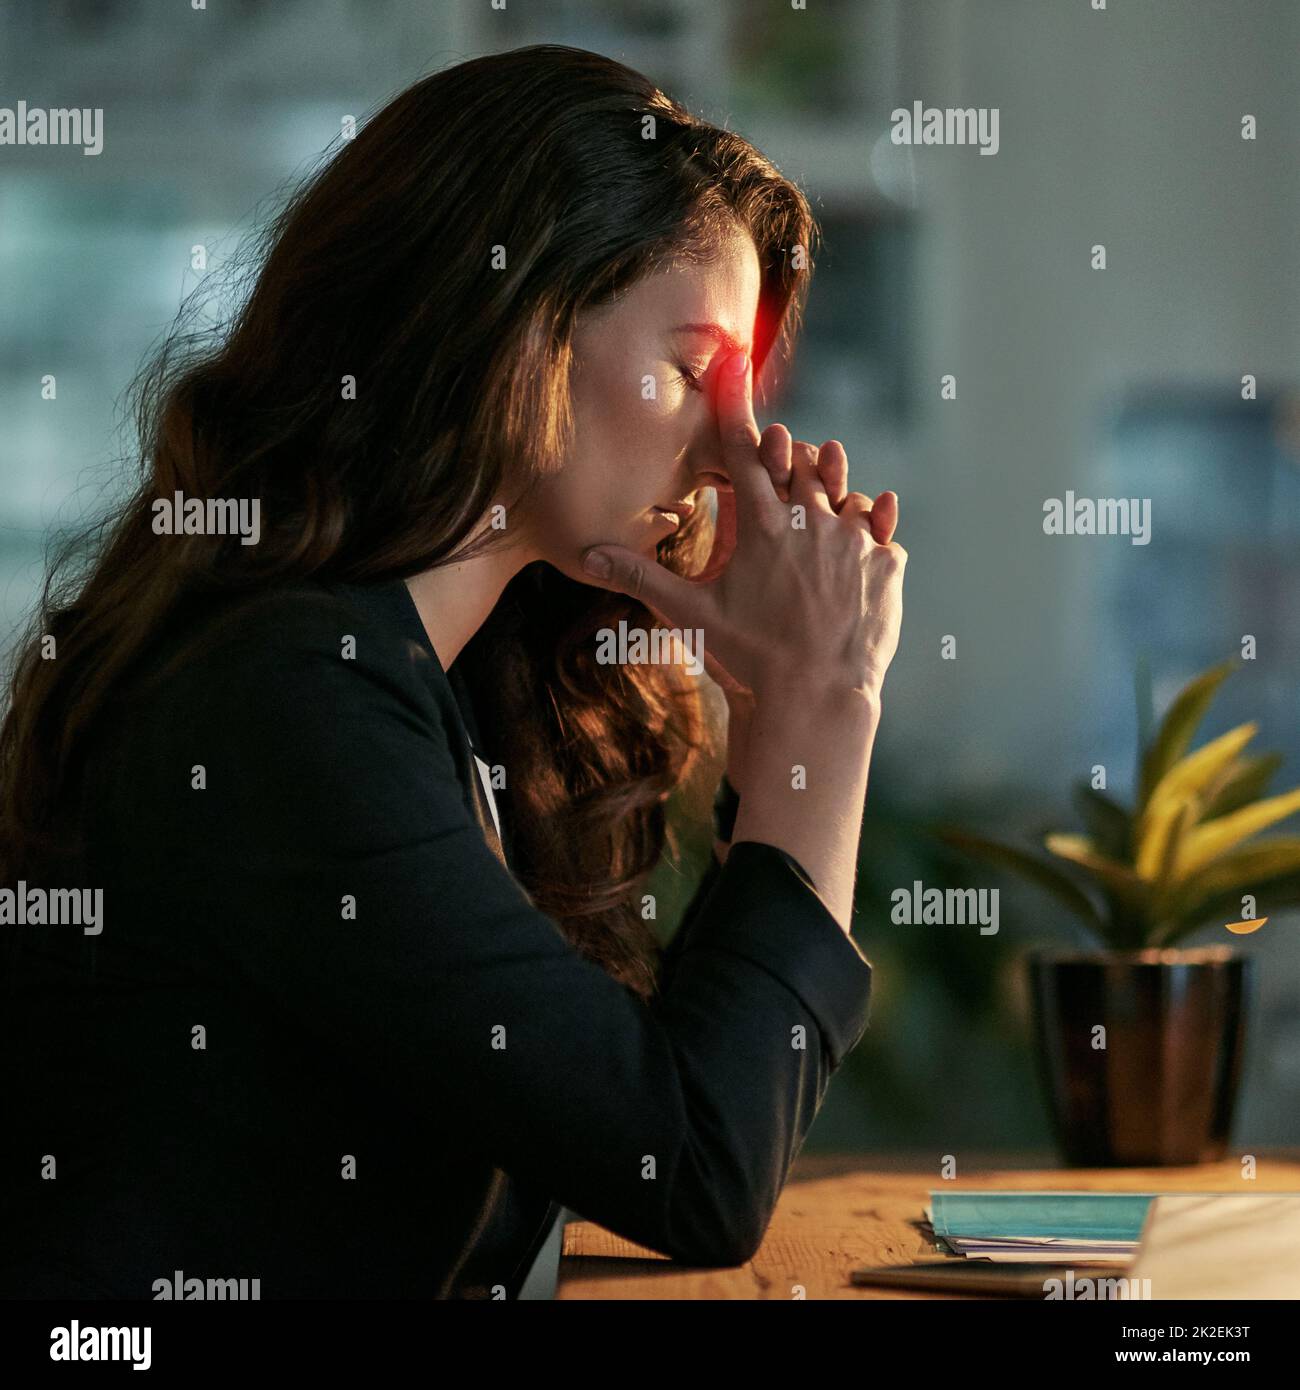 This headache is pushing me back from work. Cropped shot of a stressed out businesswoman working late in an office. Stock Photo